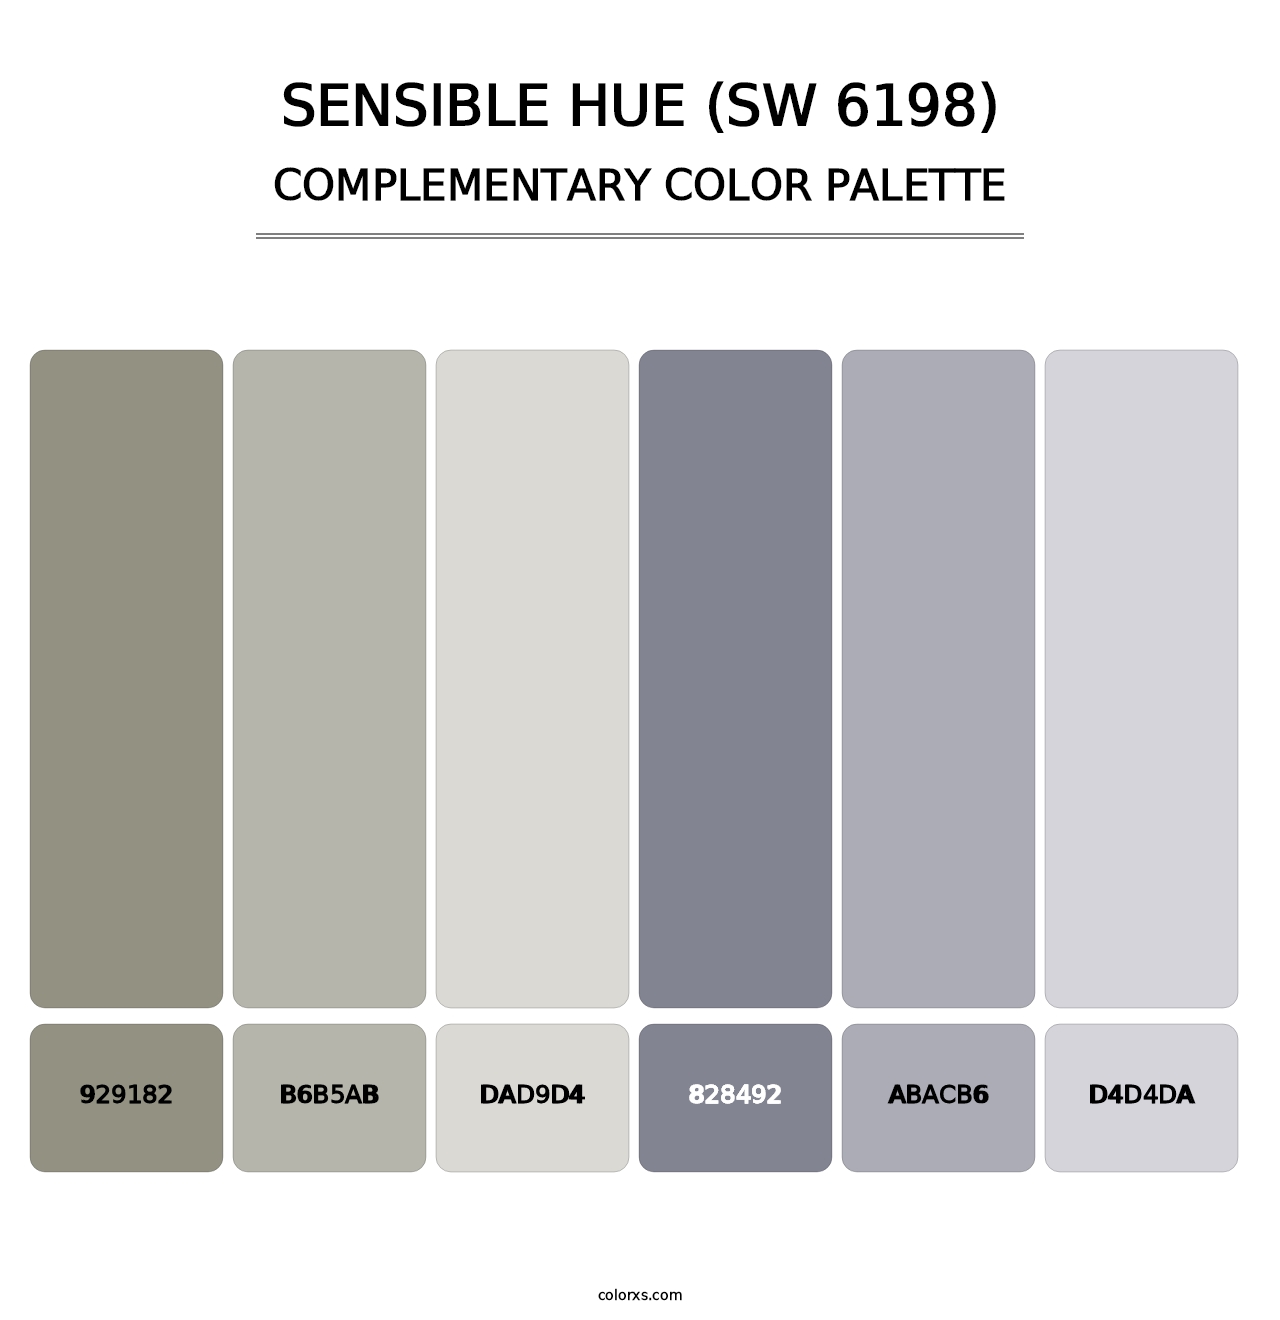 Sensible Hue (SW 6198) - Complementary Color Palette